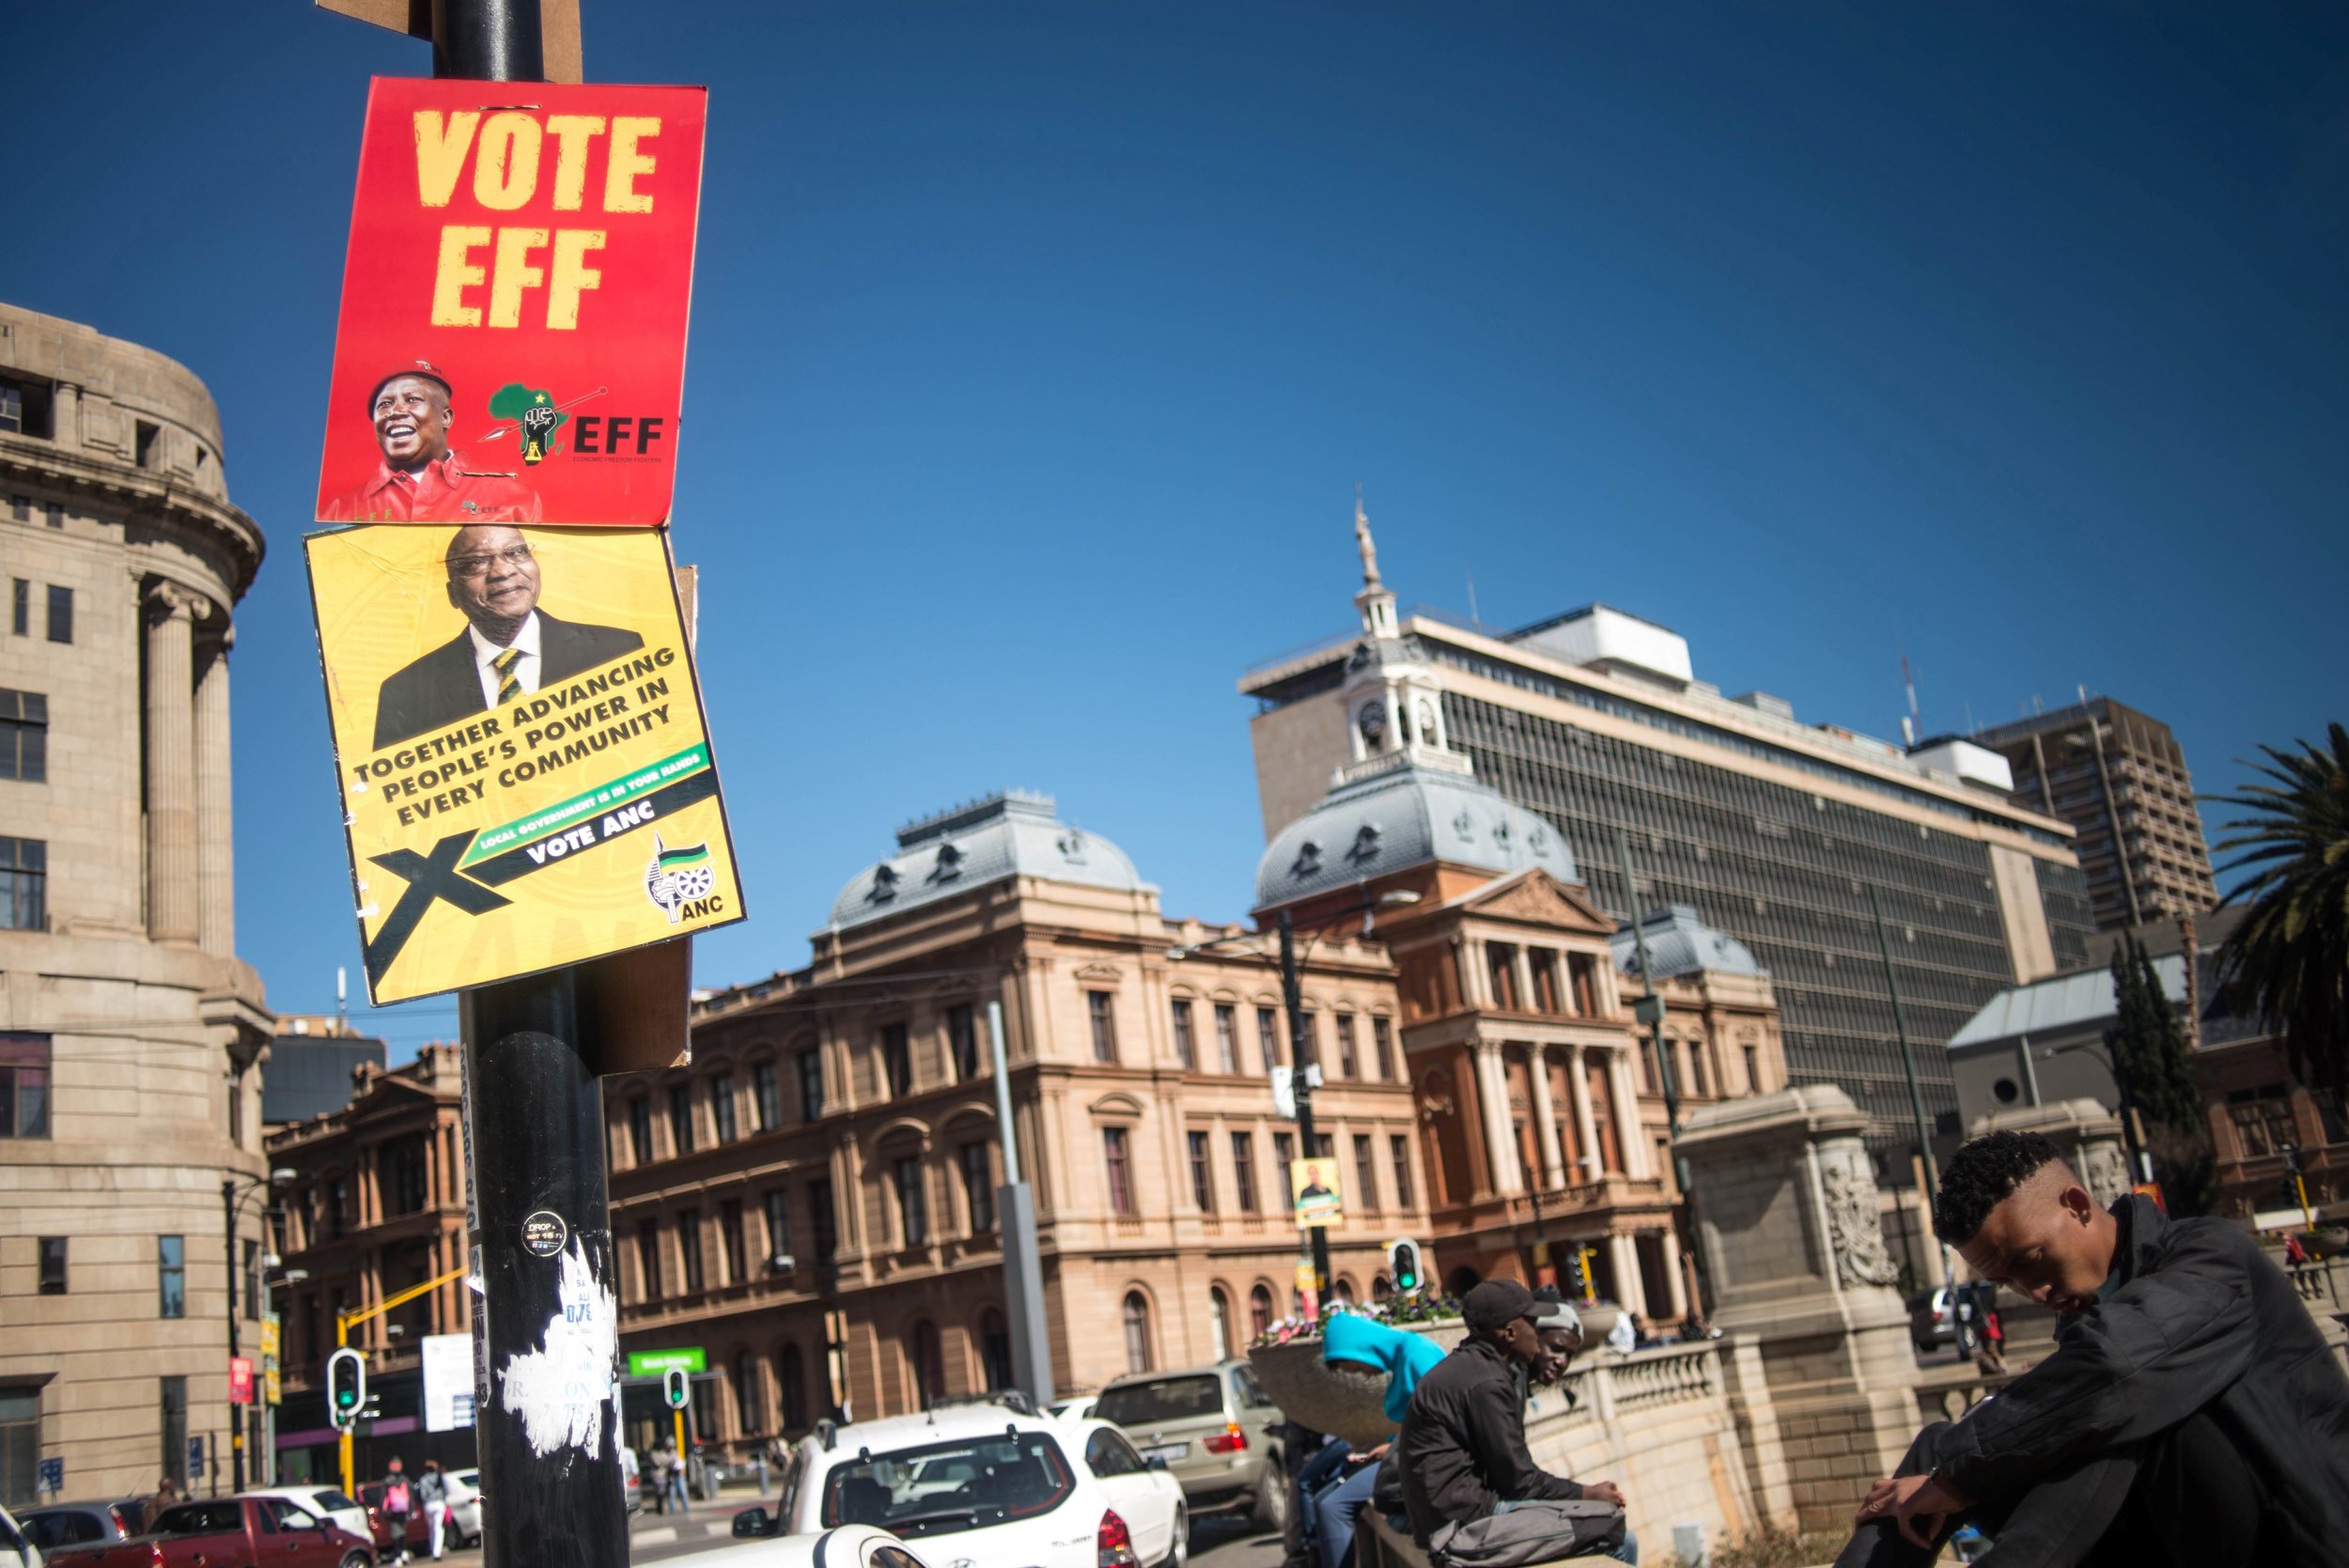 South Africa election posters